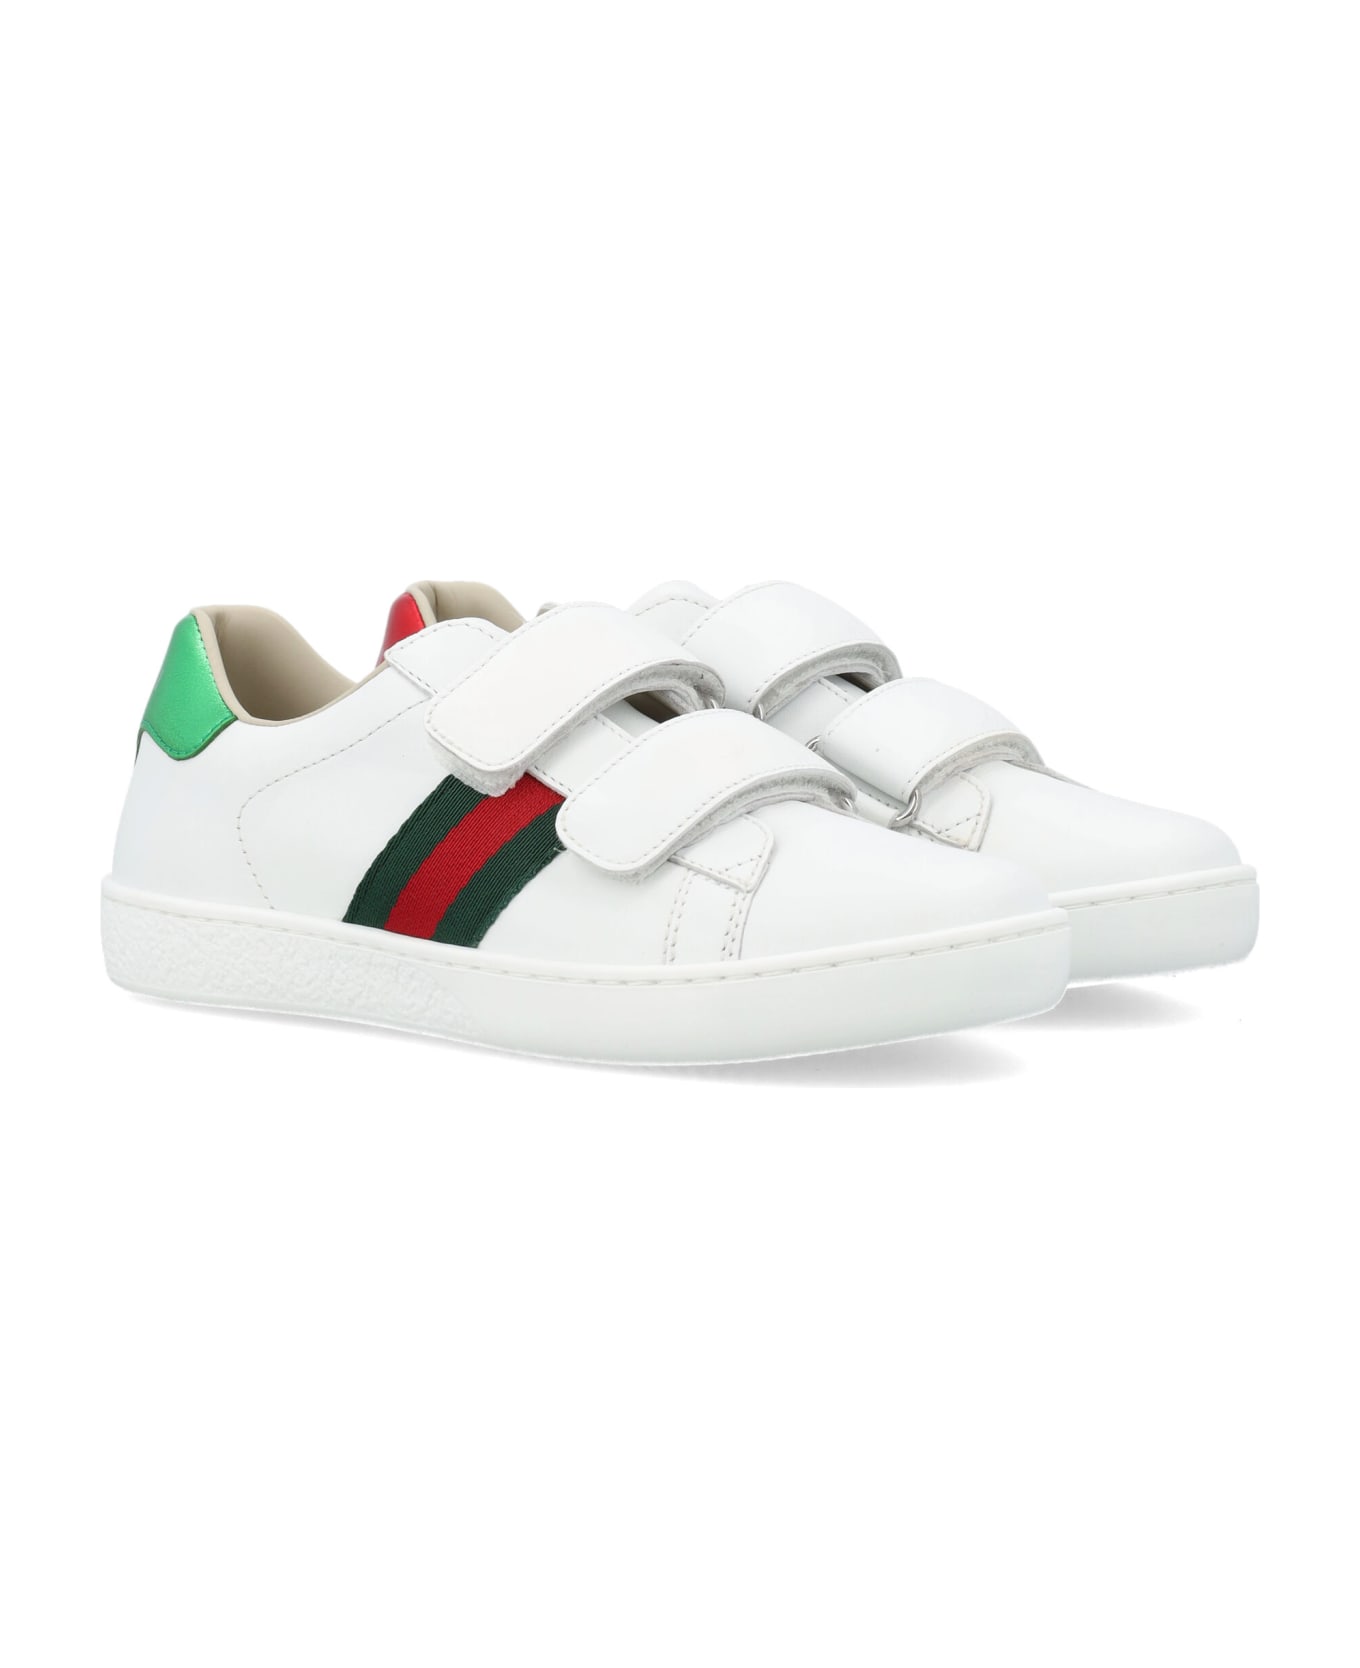 Gucci Ace Leather Sneaker - WHITE